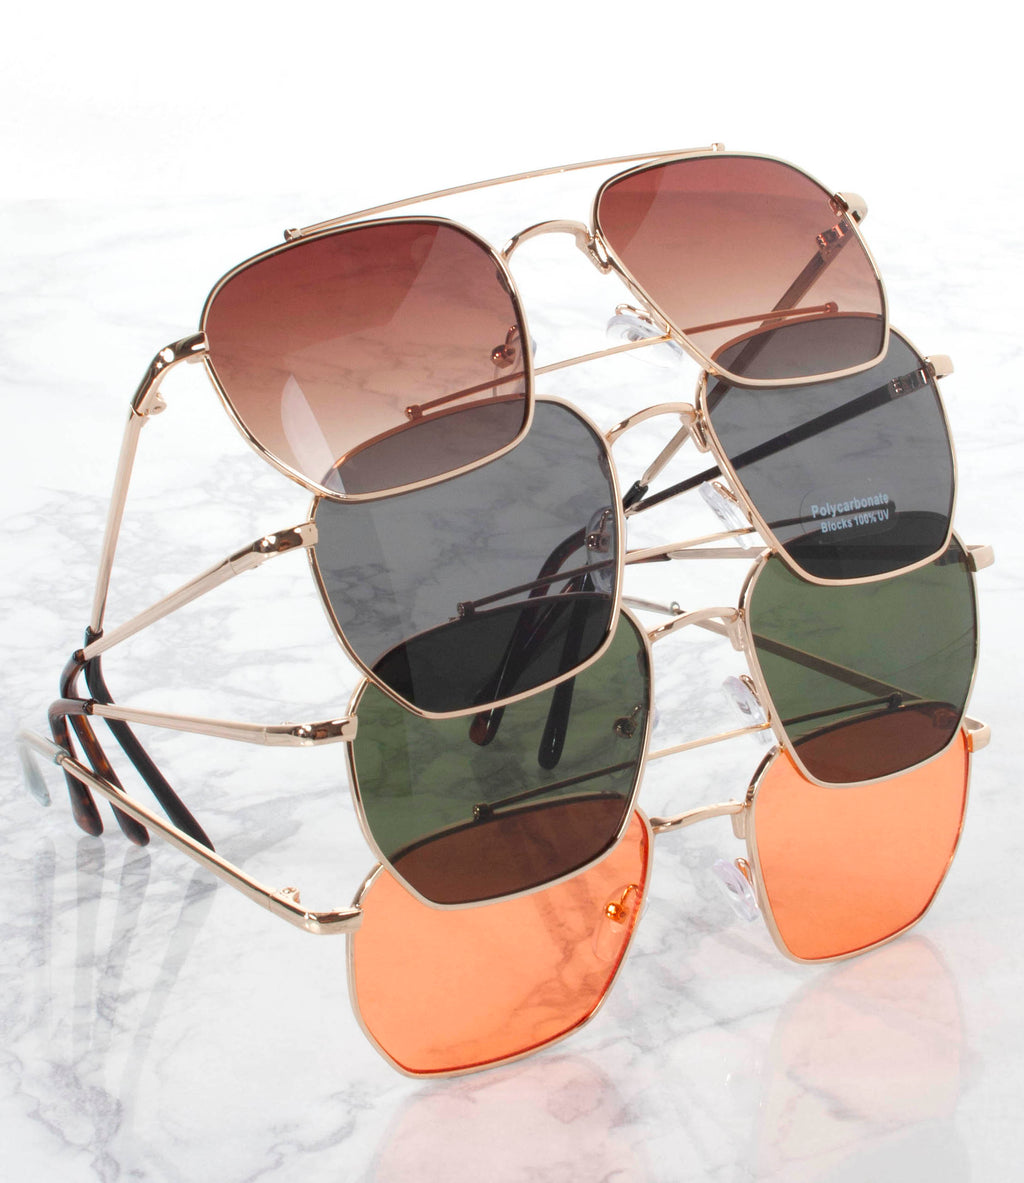 Wholesale Fashion Sunglasses - M23150SD - Pack of 12